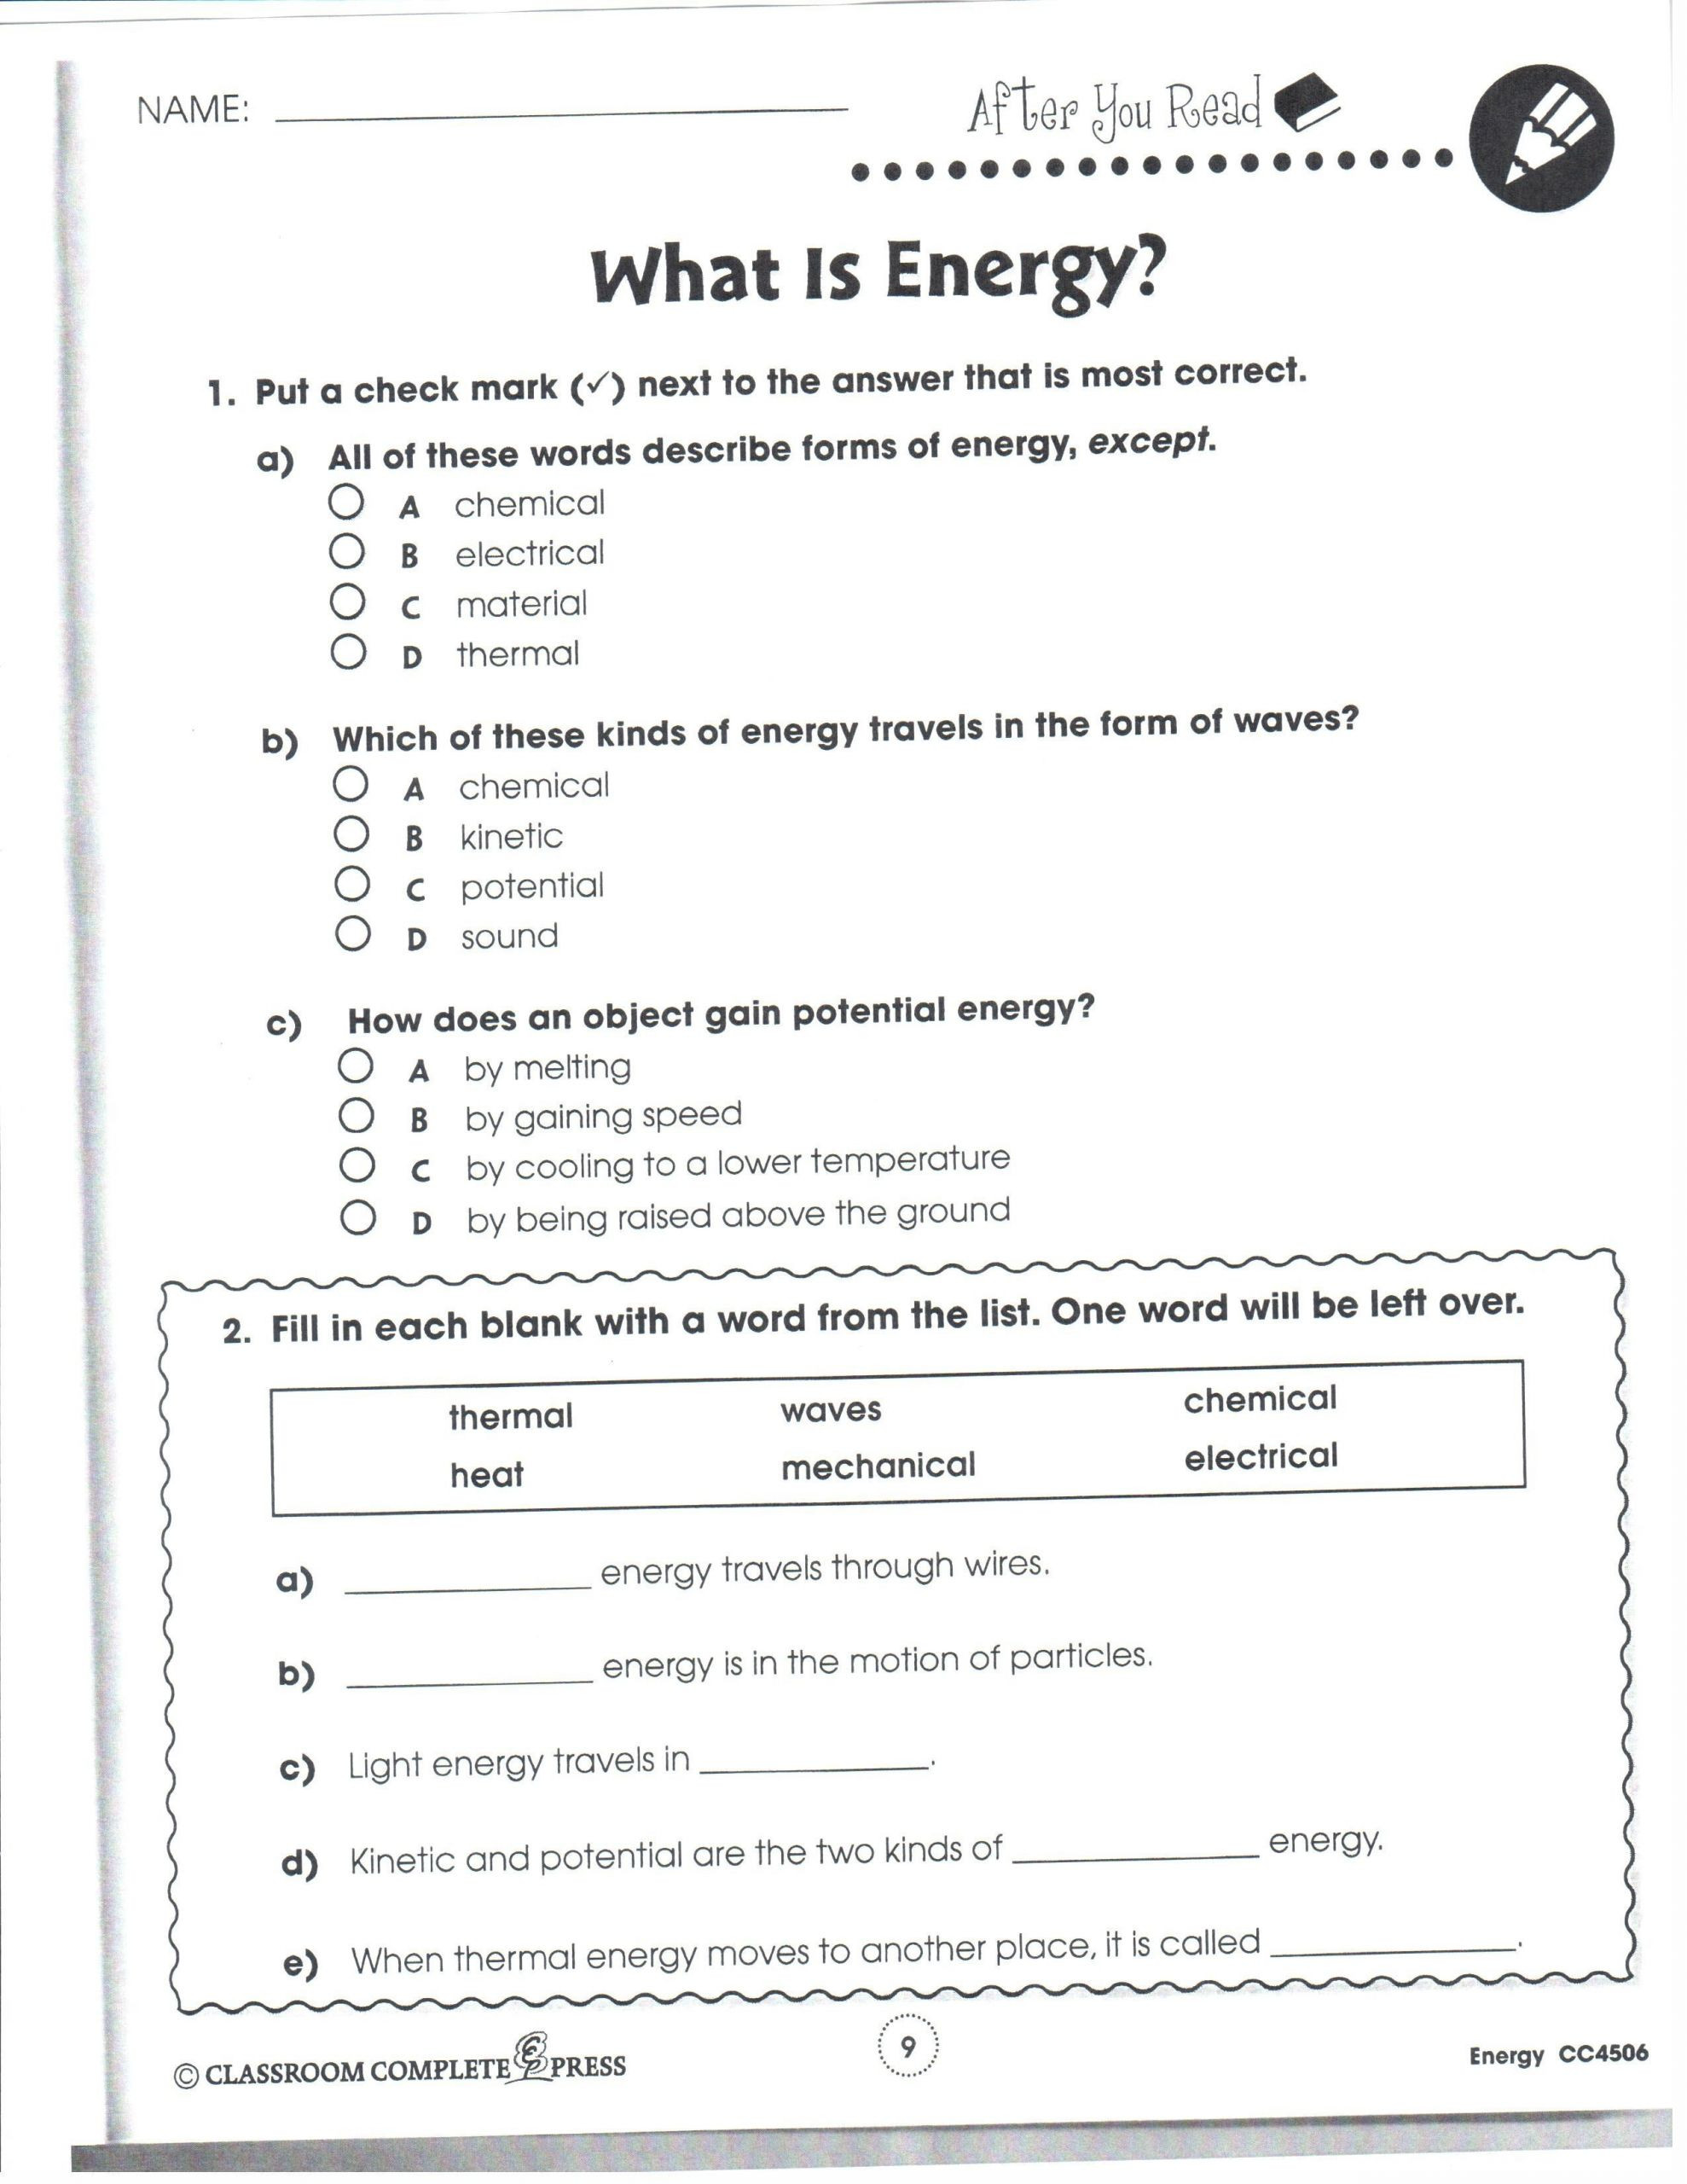 Dialogue Worksheets 4th Grade Simple Dialogue for Kids Worksheets